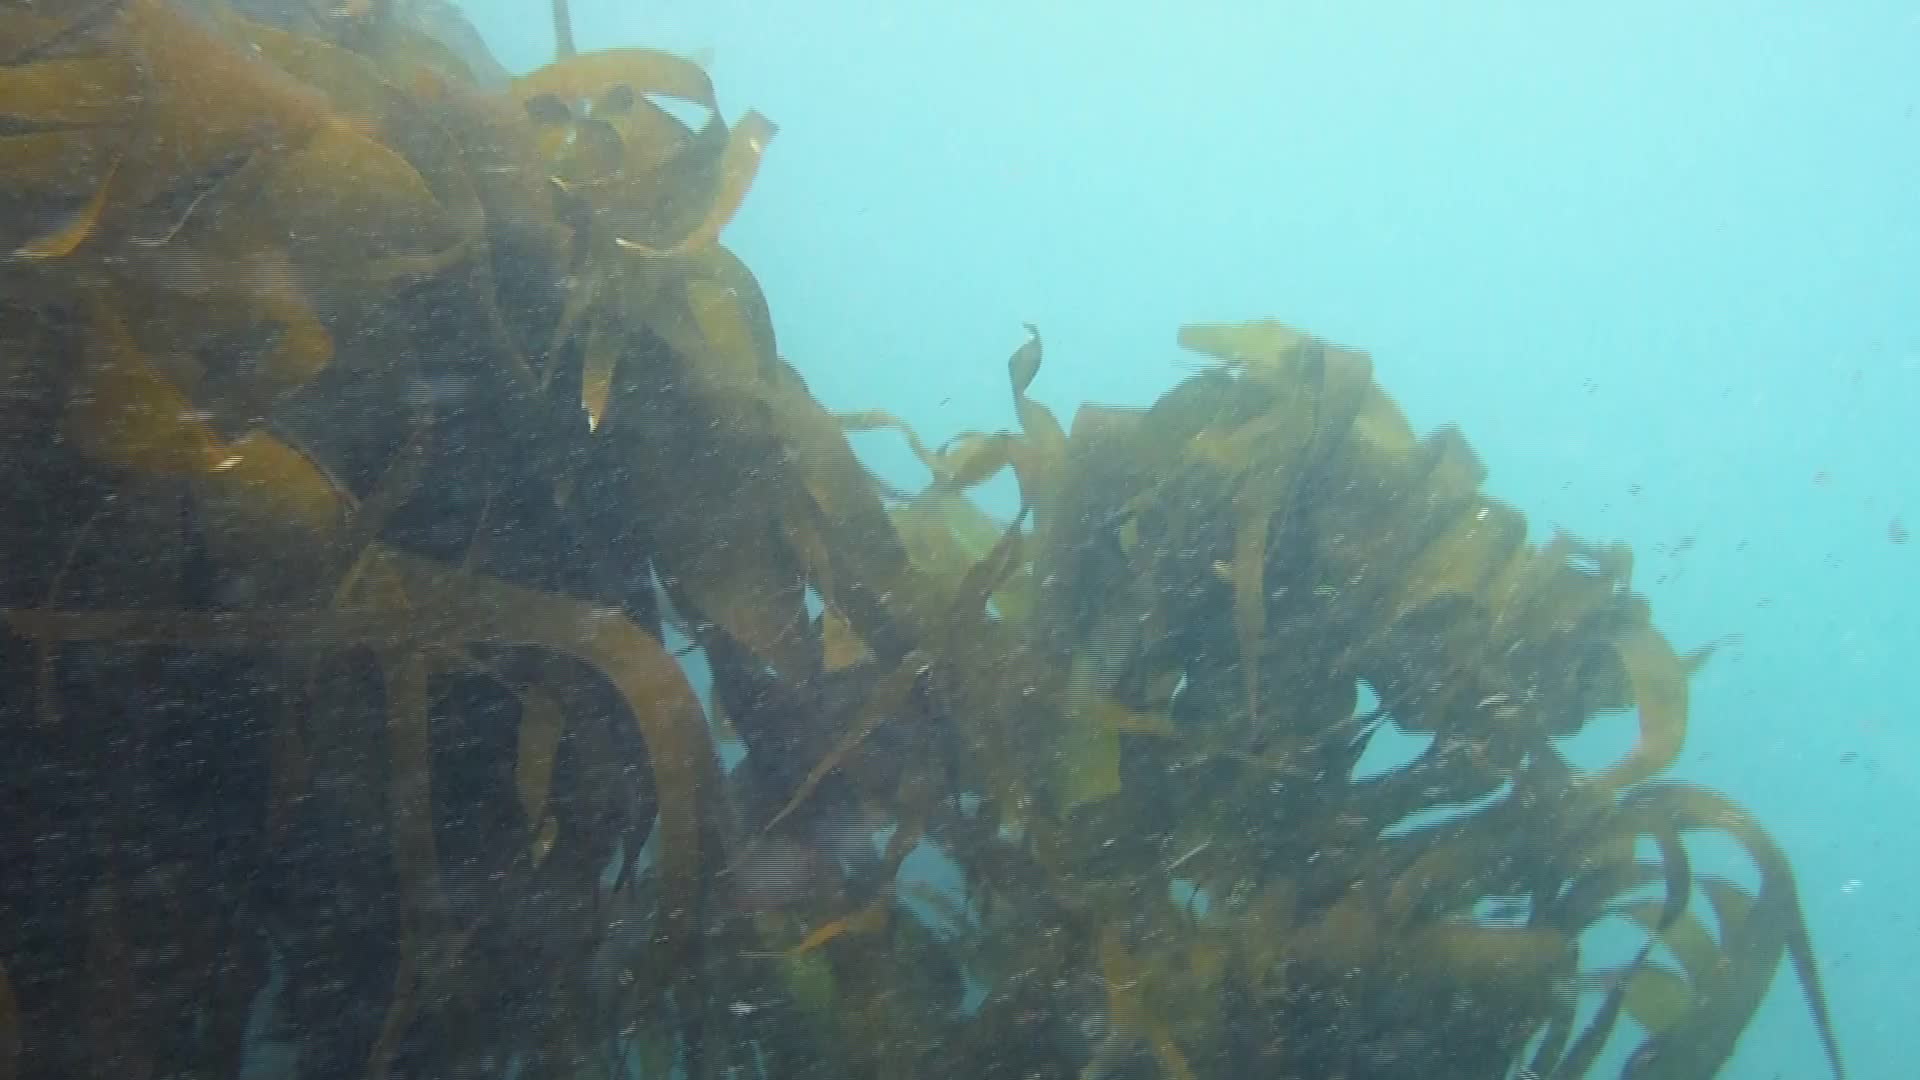 a number of fish swimming in water near some plants